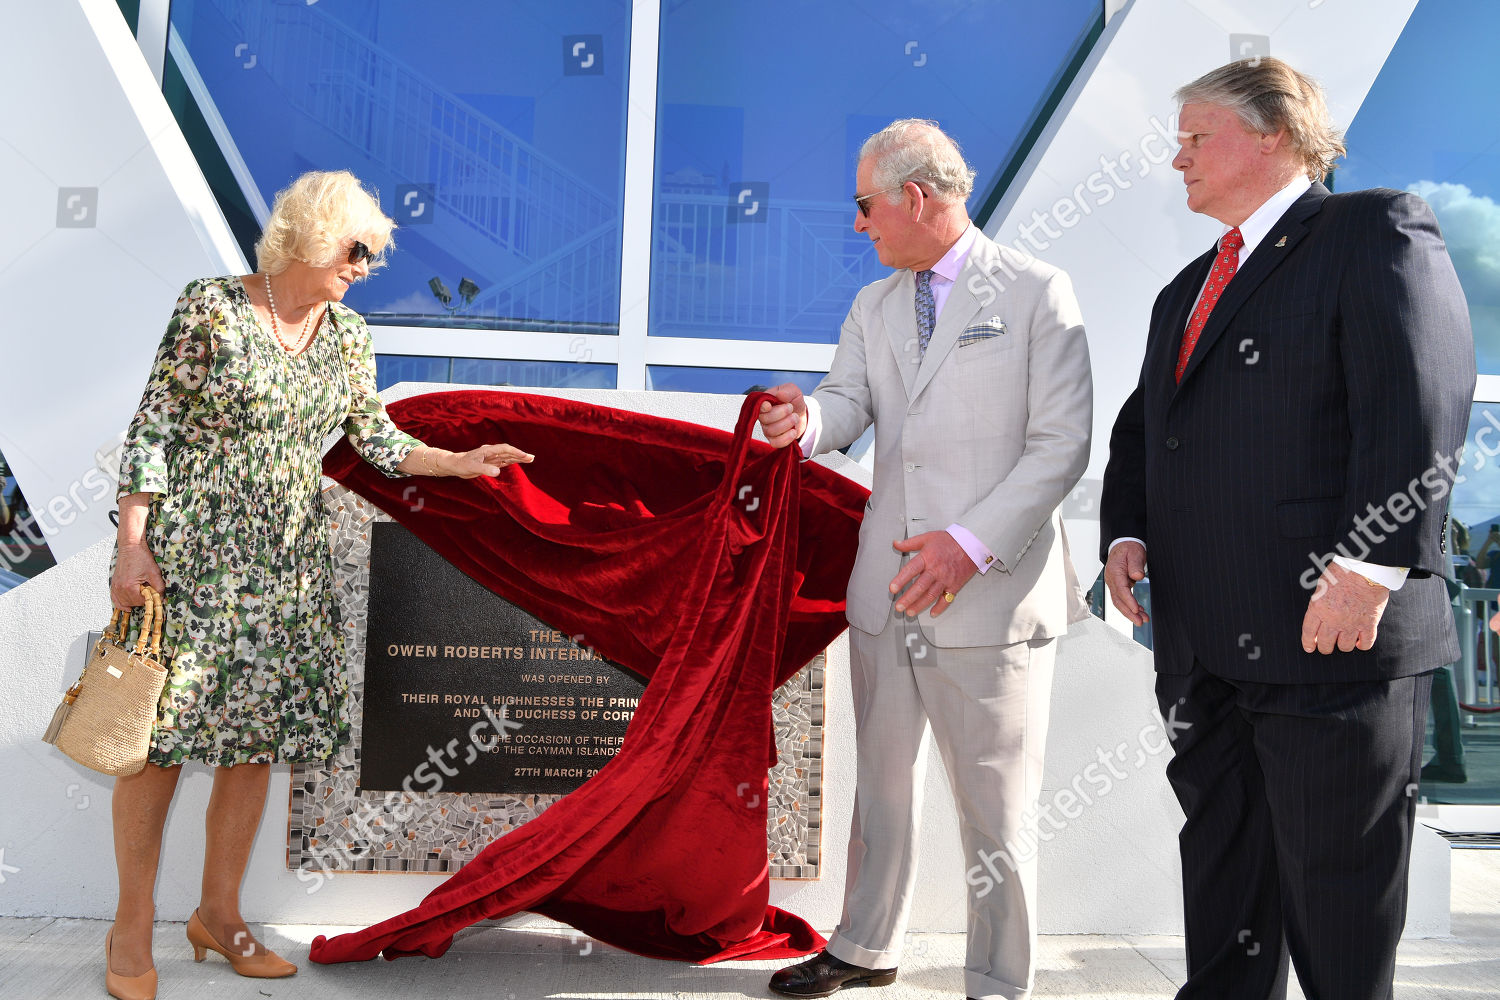 prince-charles-and-camilla-duchess-of-cornwall-caribbean-tour-cayman-islands-shutterstock-editorial-10180229v.jpg